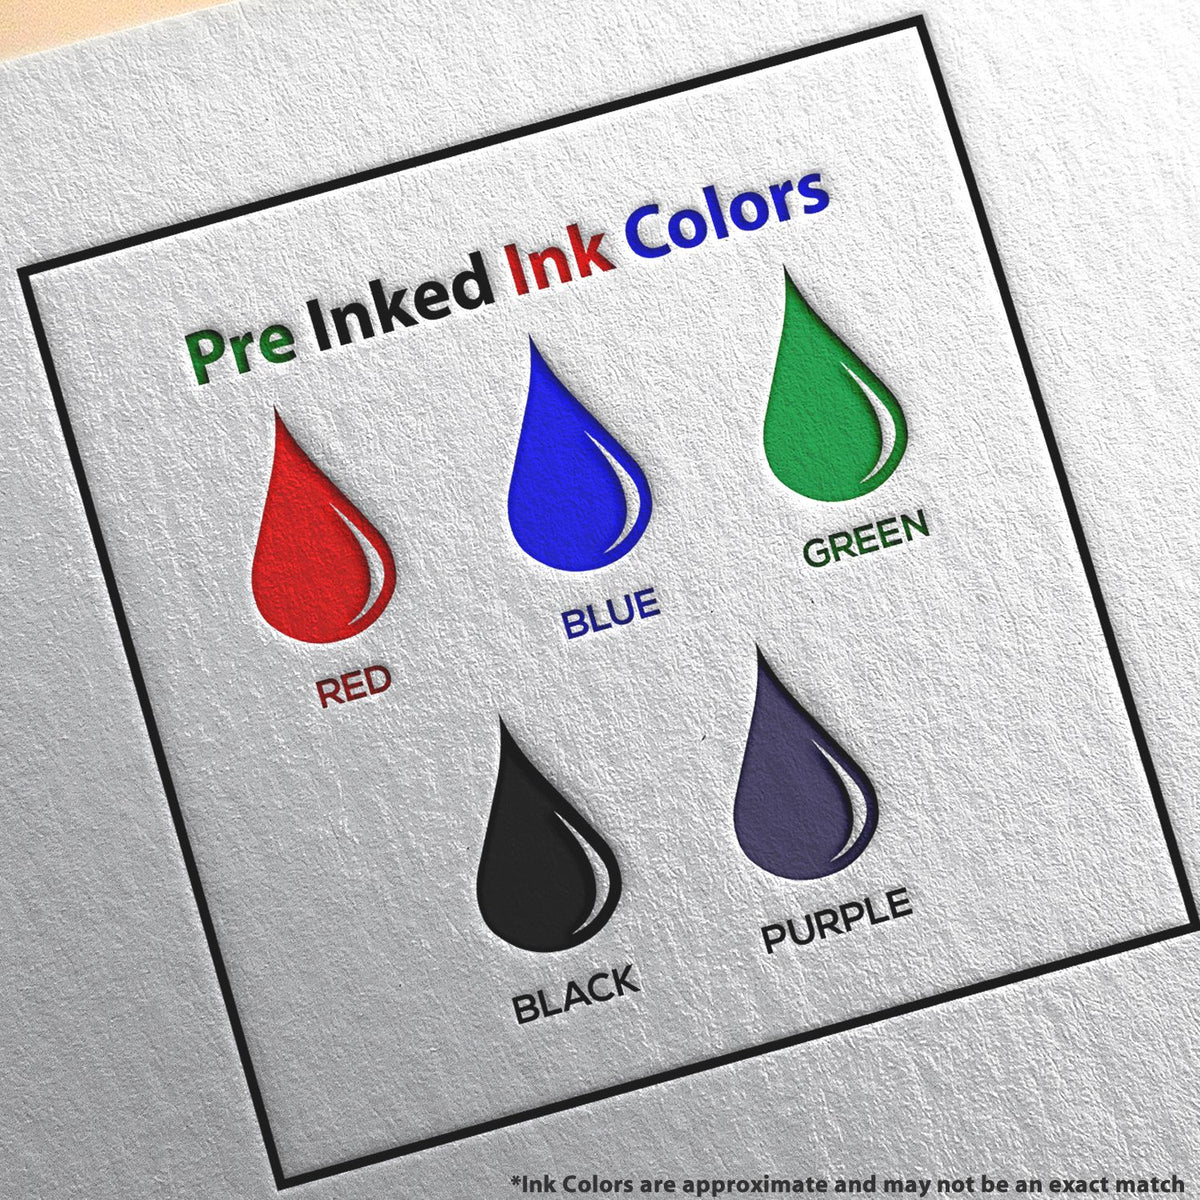 A picture showing the different ink colors or hues available for the Premium MaxLight Pre-Inked Nebraska Landscape Architectural Stamp product.